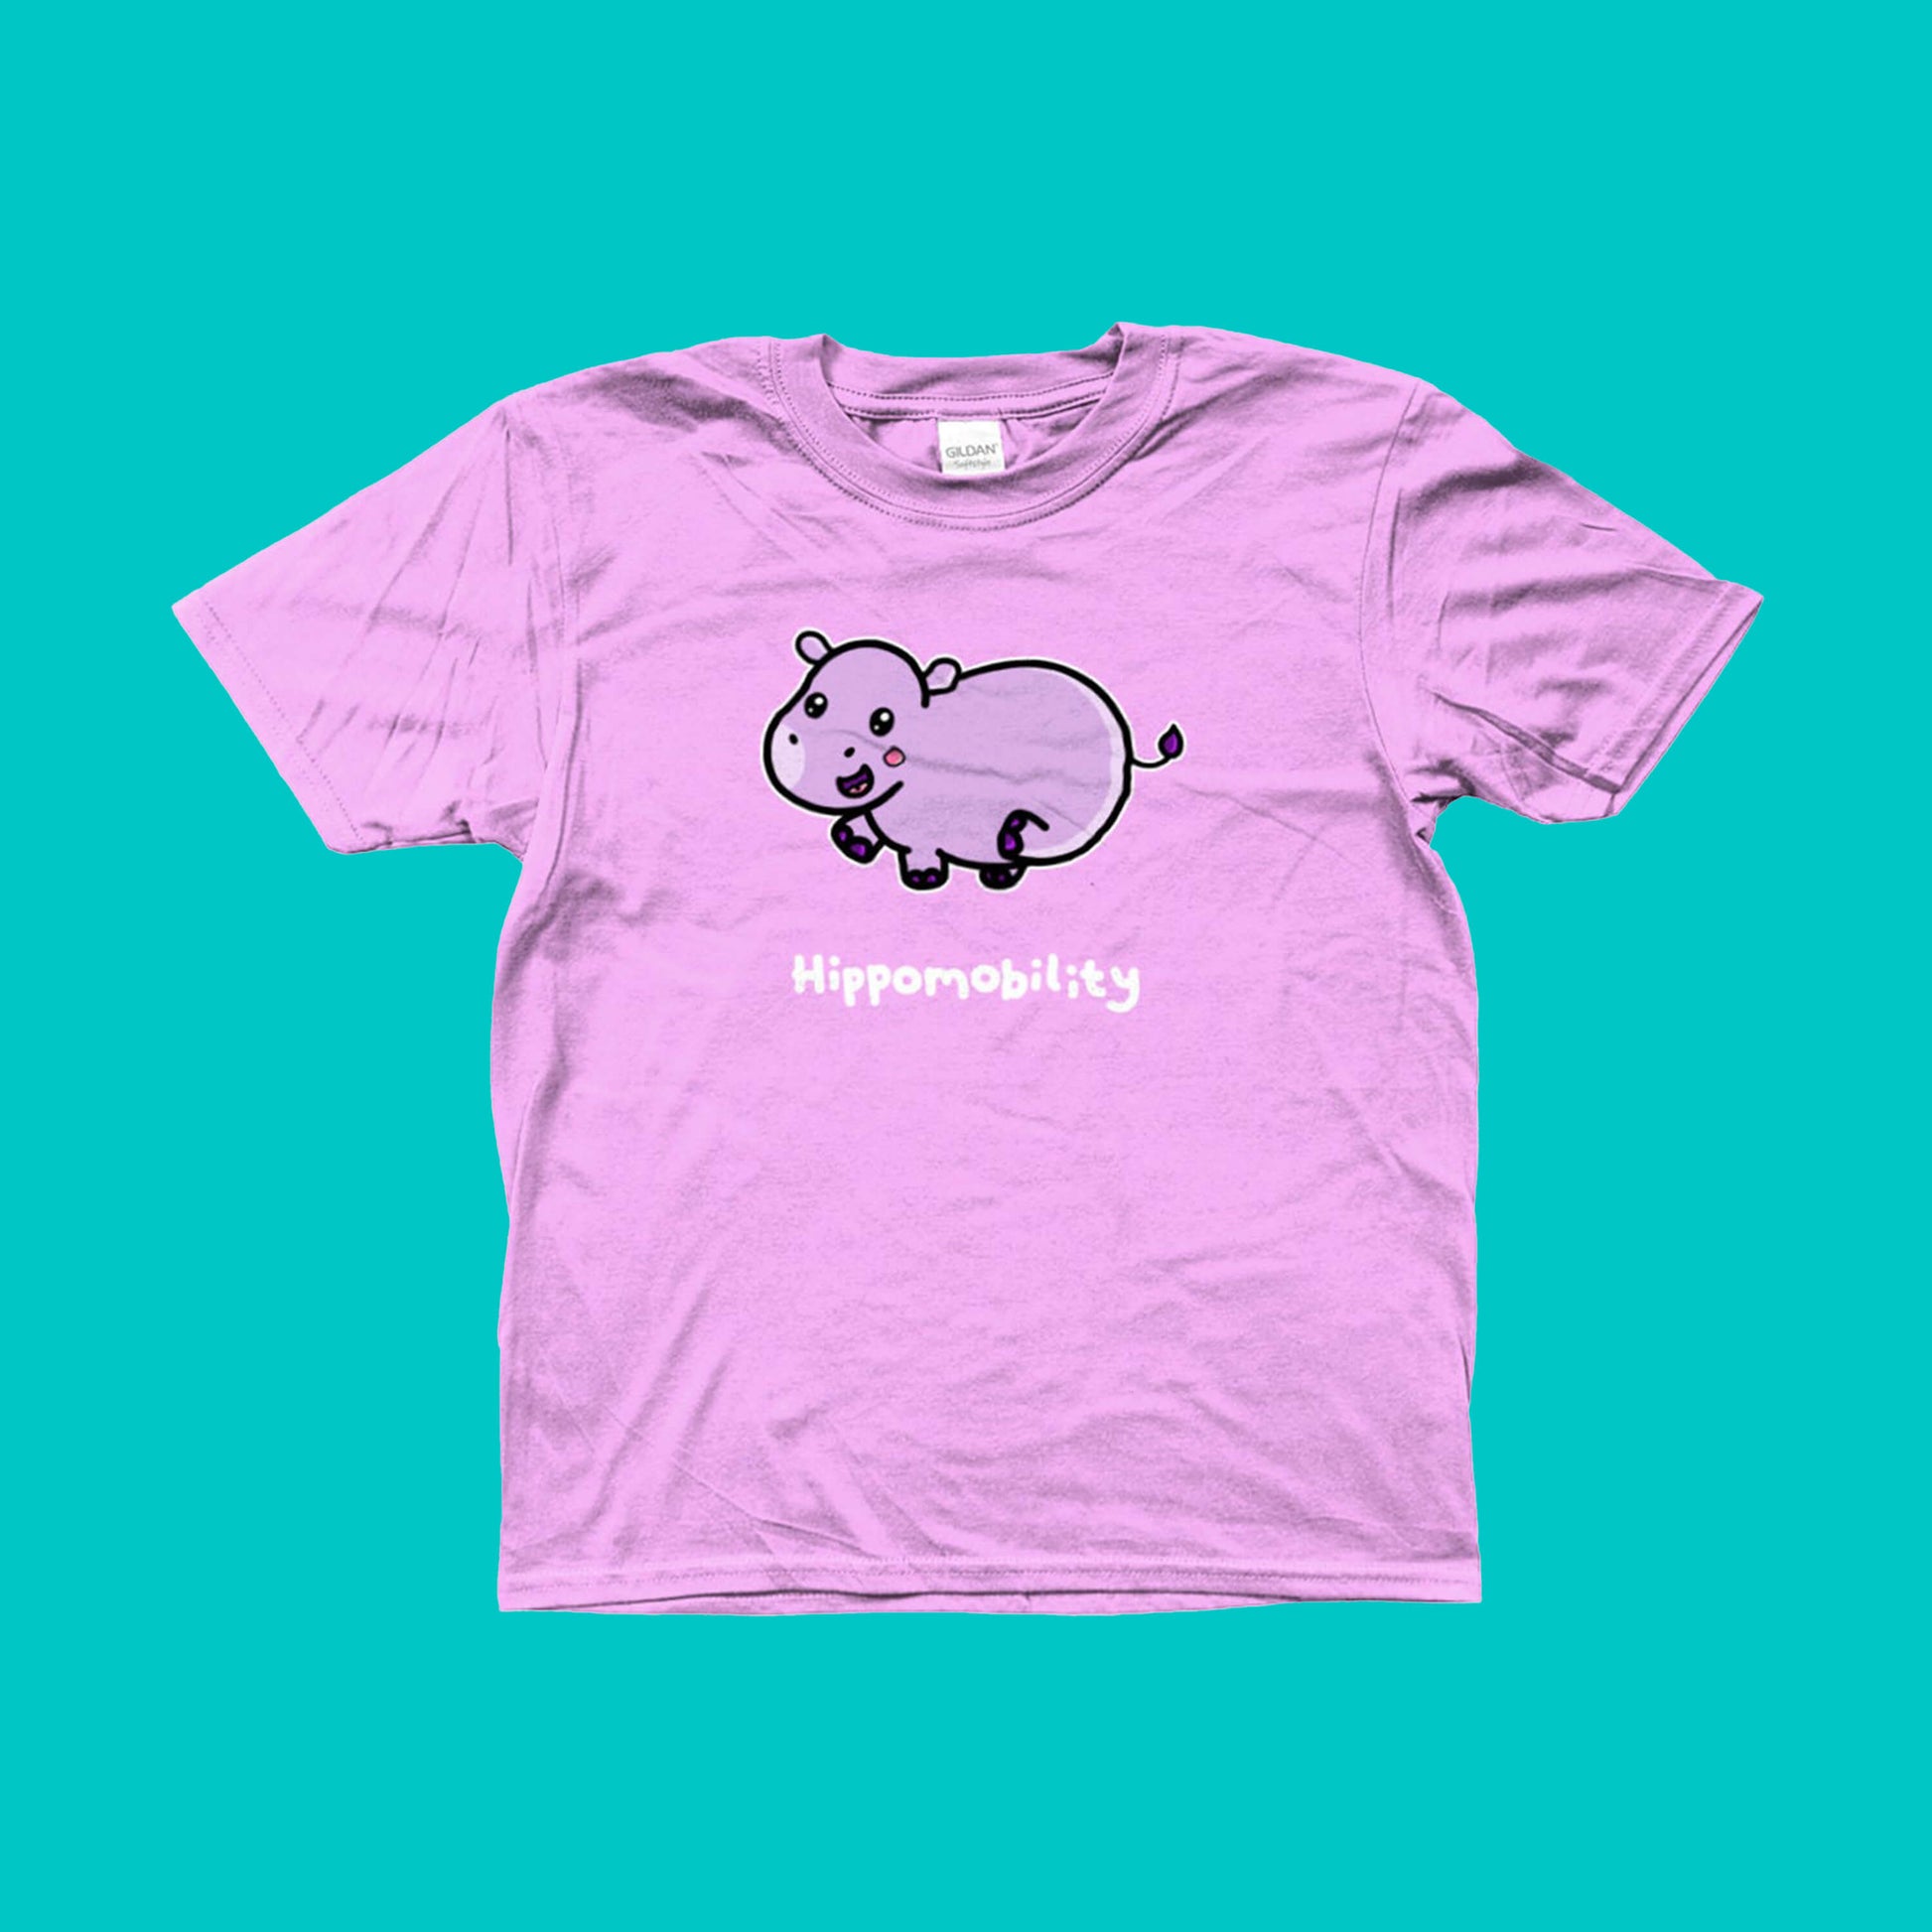 Hippomobility - Hyper Mobility Kids Tee shown on a blue background. The light pink t-shirt has an illustration of a pink happy hippo with 'hippomobility' in white text underneath. The hand drawn design is made to raise awareness for hyper mobility.